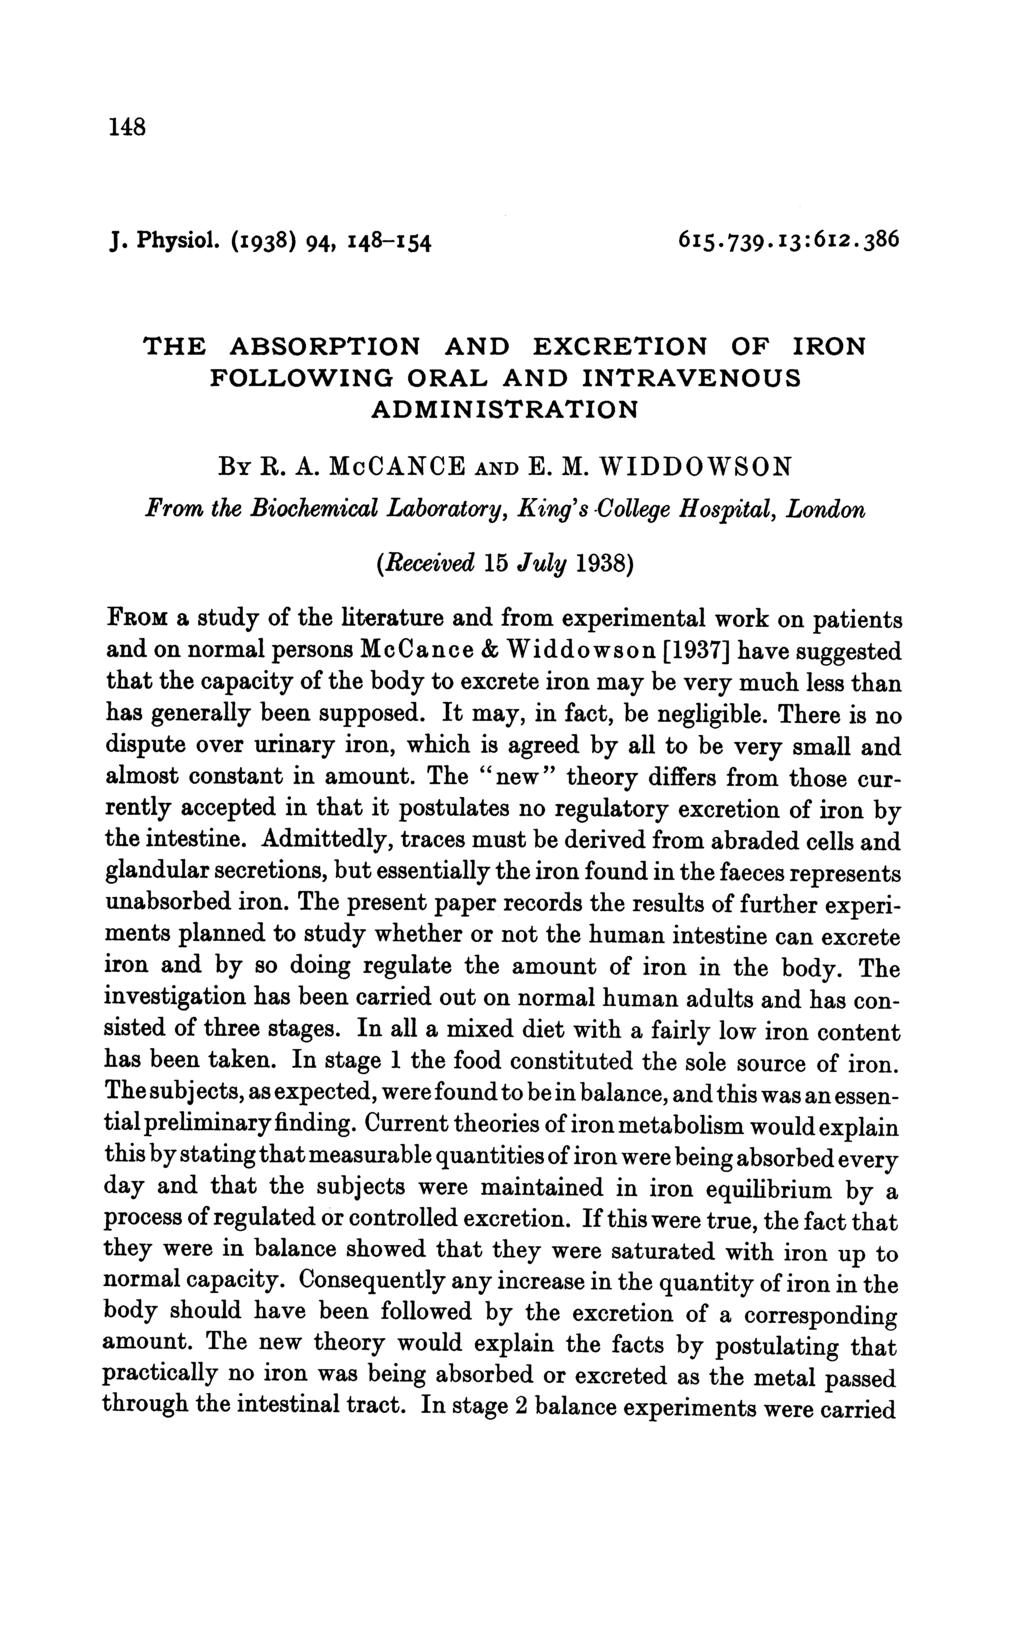 148 J. Physiol. (I938) 94, I48-I54 6I5.739.I3:6I2.386 THE ABSORPTION AND EXCRETION OF IRON FOLLOWING ORAL AND INTRAVENOUS ADMINISTRATION BY R. A. Mc